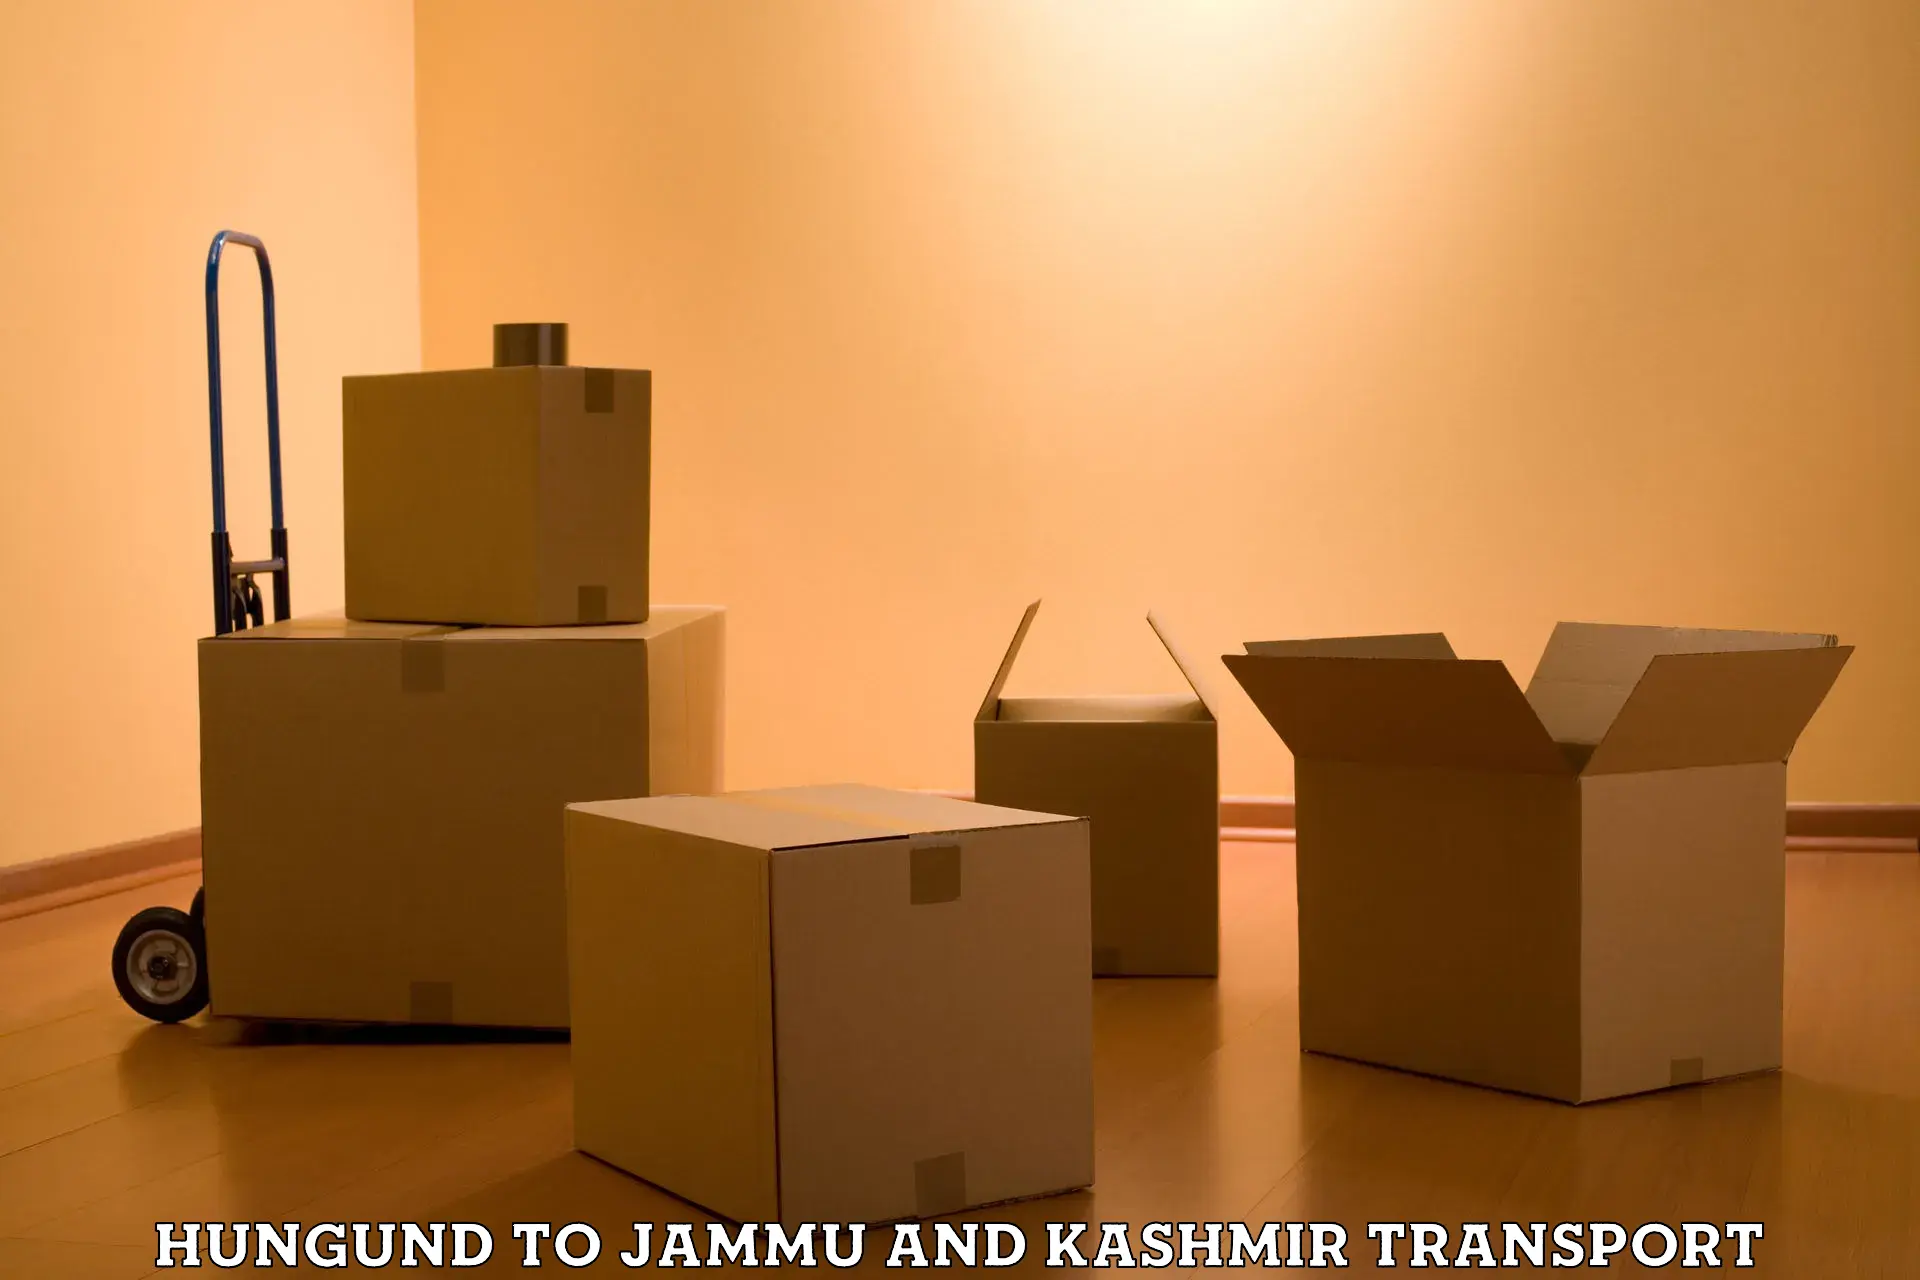 Part load transport service in India Hungund to Jammu and Kashmir